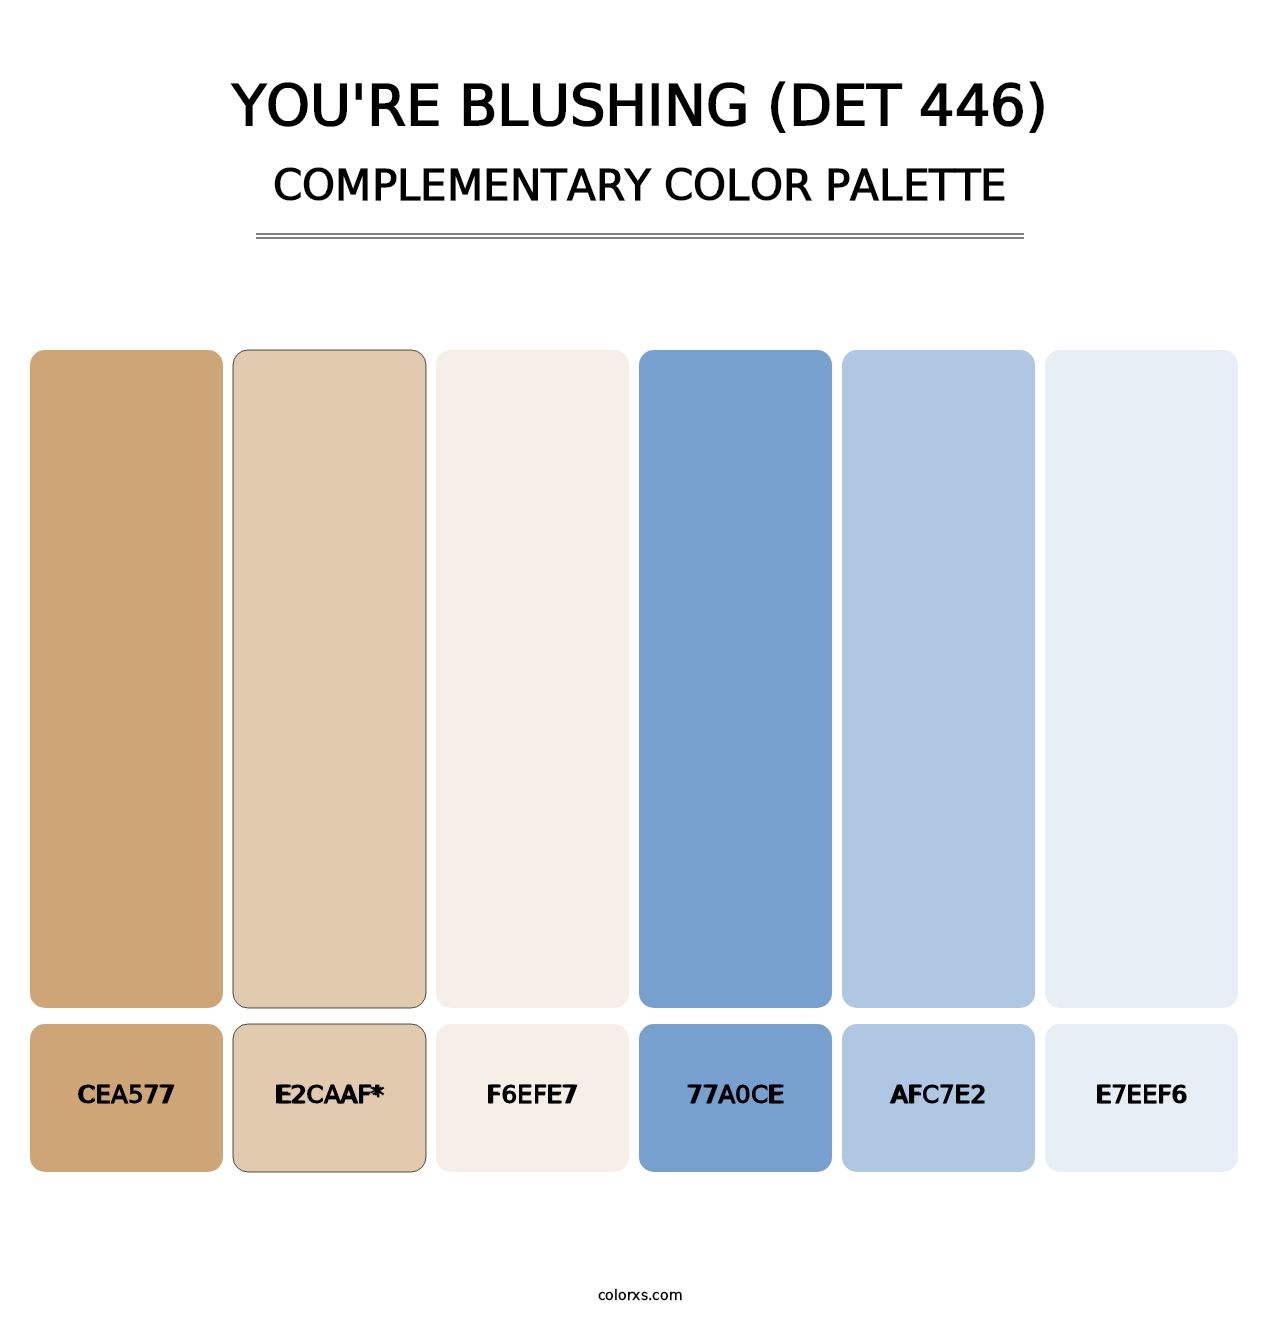 You're Blushing (DET 446) - Complementary Color Palette